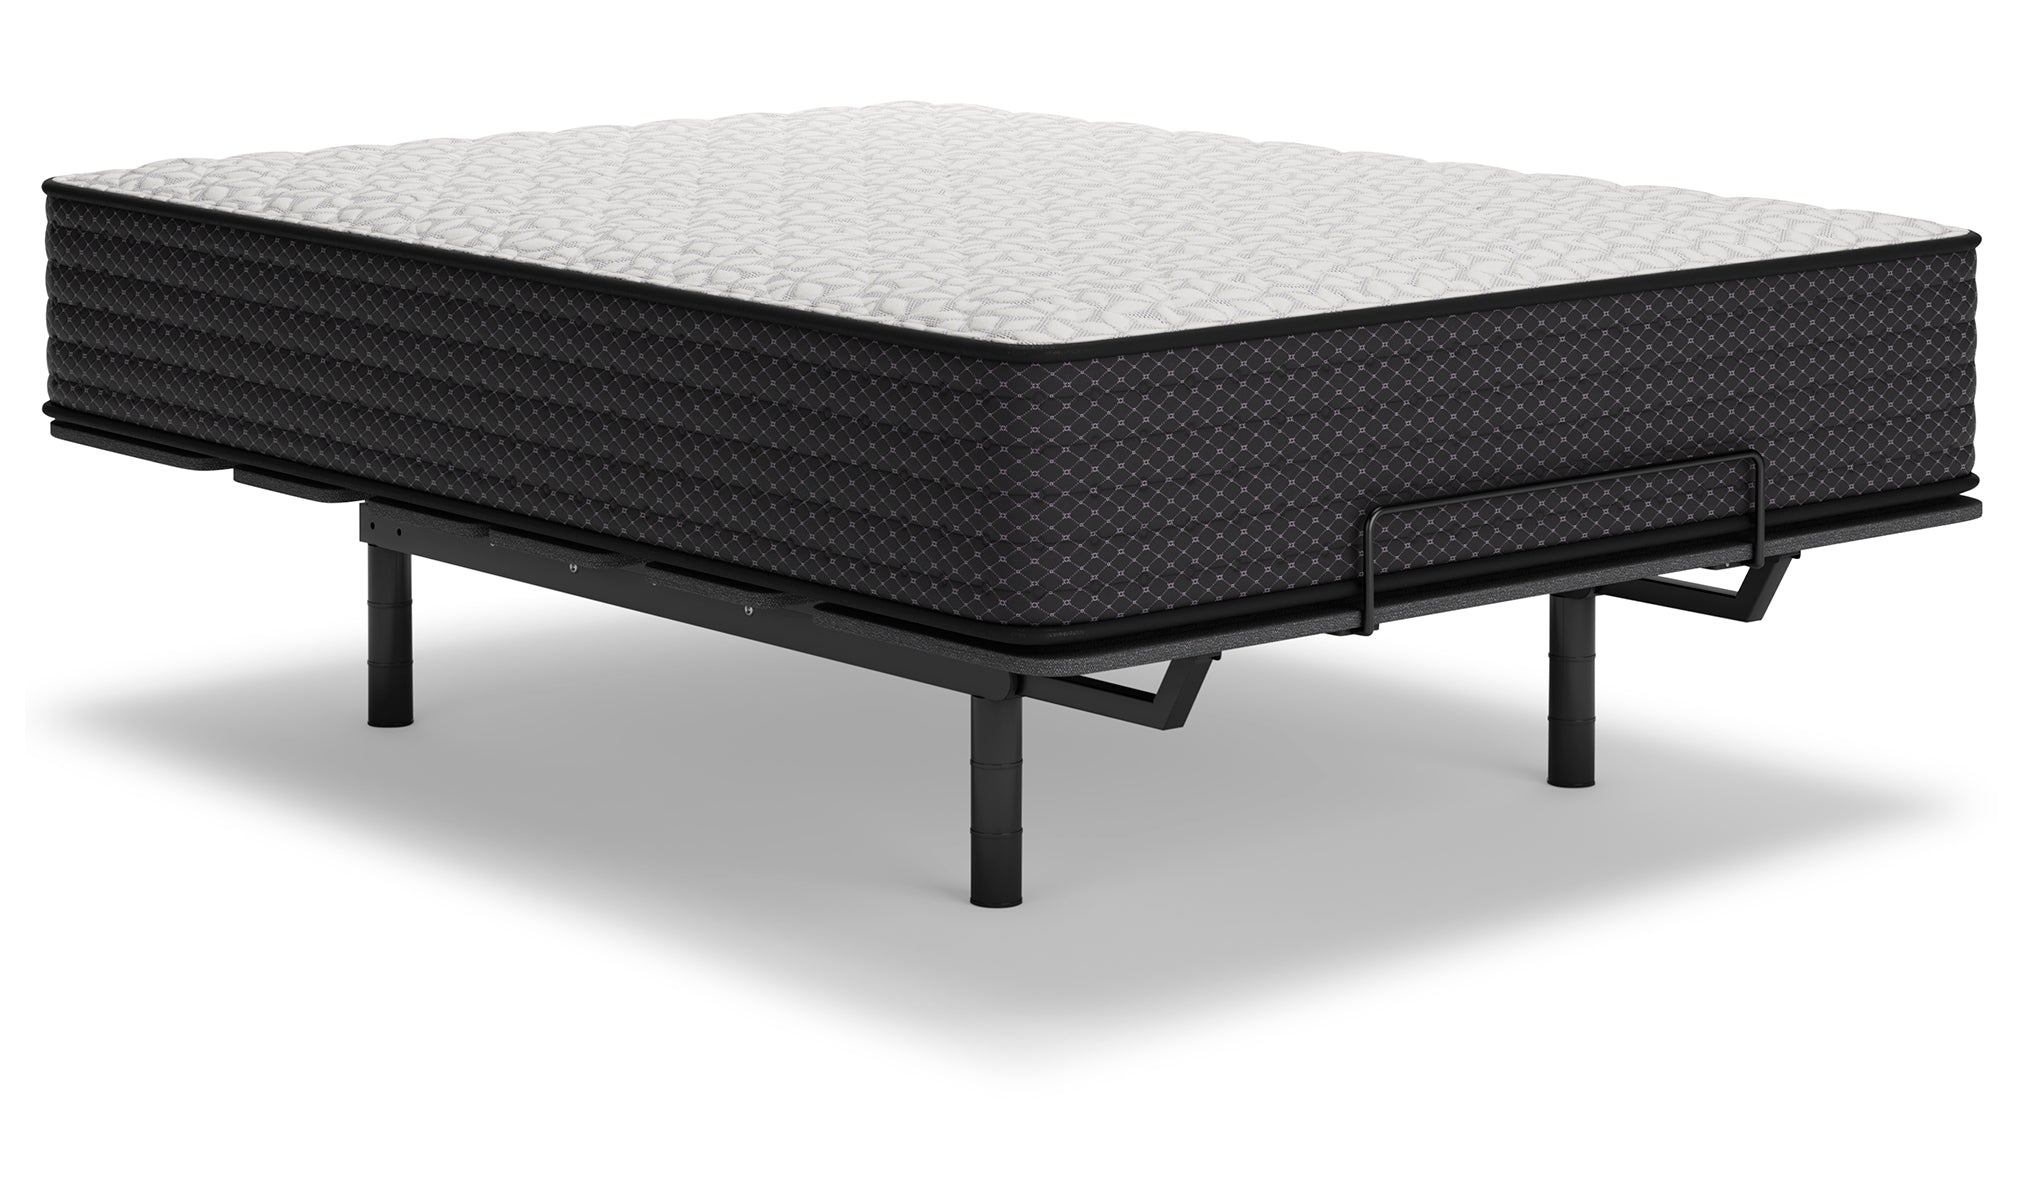 Limited Edition Firm Full Mattress